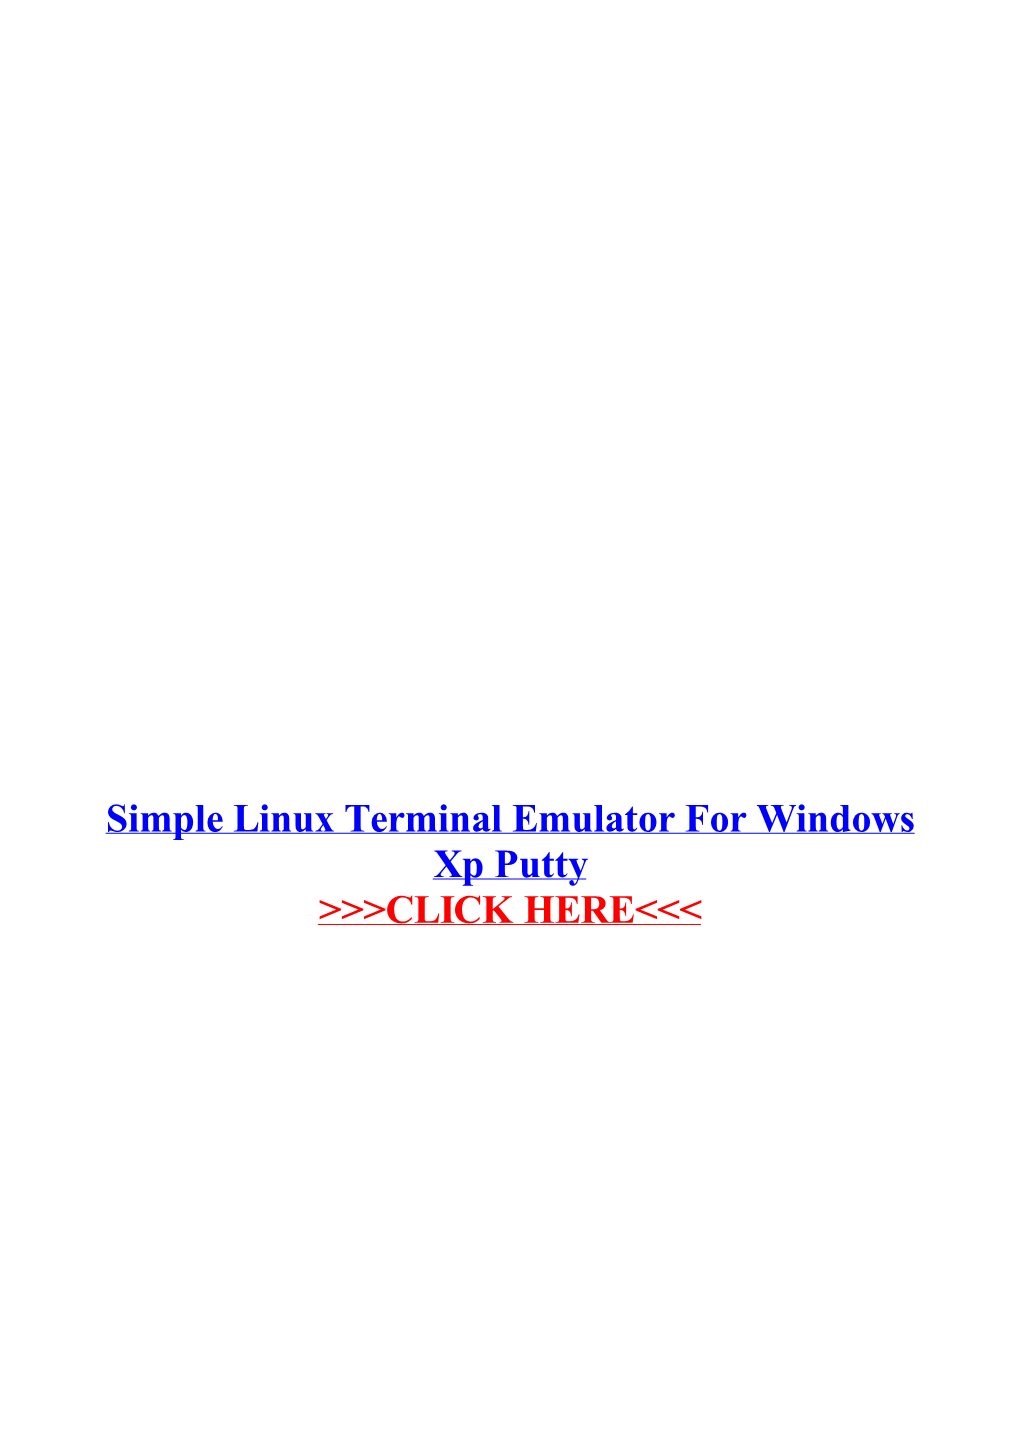 Simple Linux Terminal Emulator for Windows Xp Putty